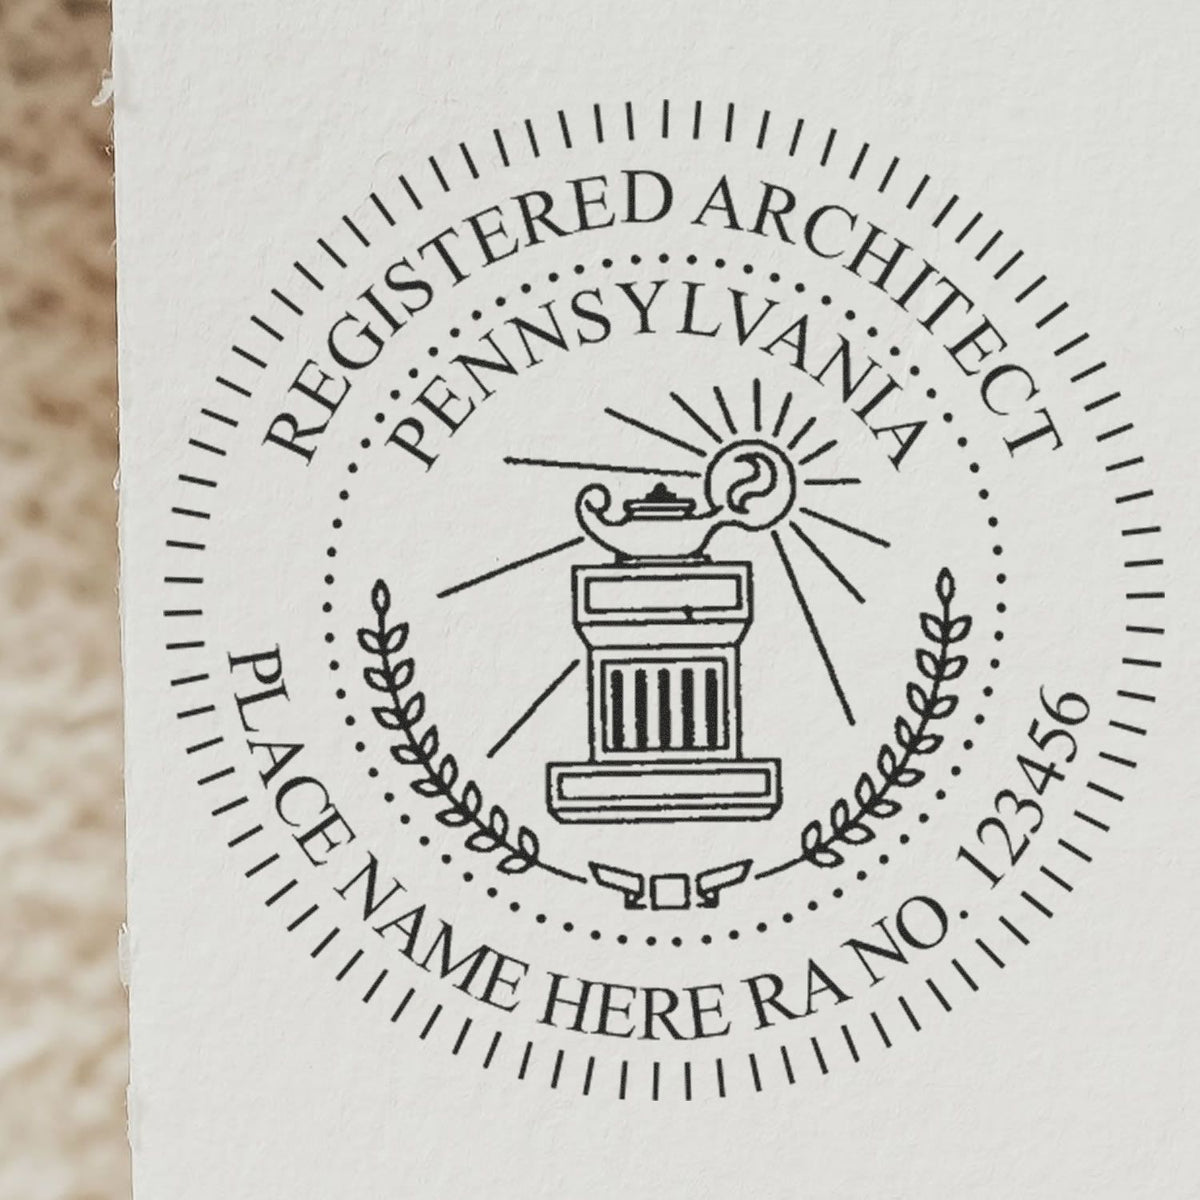 Slim Pre-Inked Pennsylvania Architect Seal Stamp in use photo showing a stamped imprint of the Slim Pre-Inked Pennsylvania Architect Seal Stamp